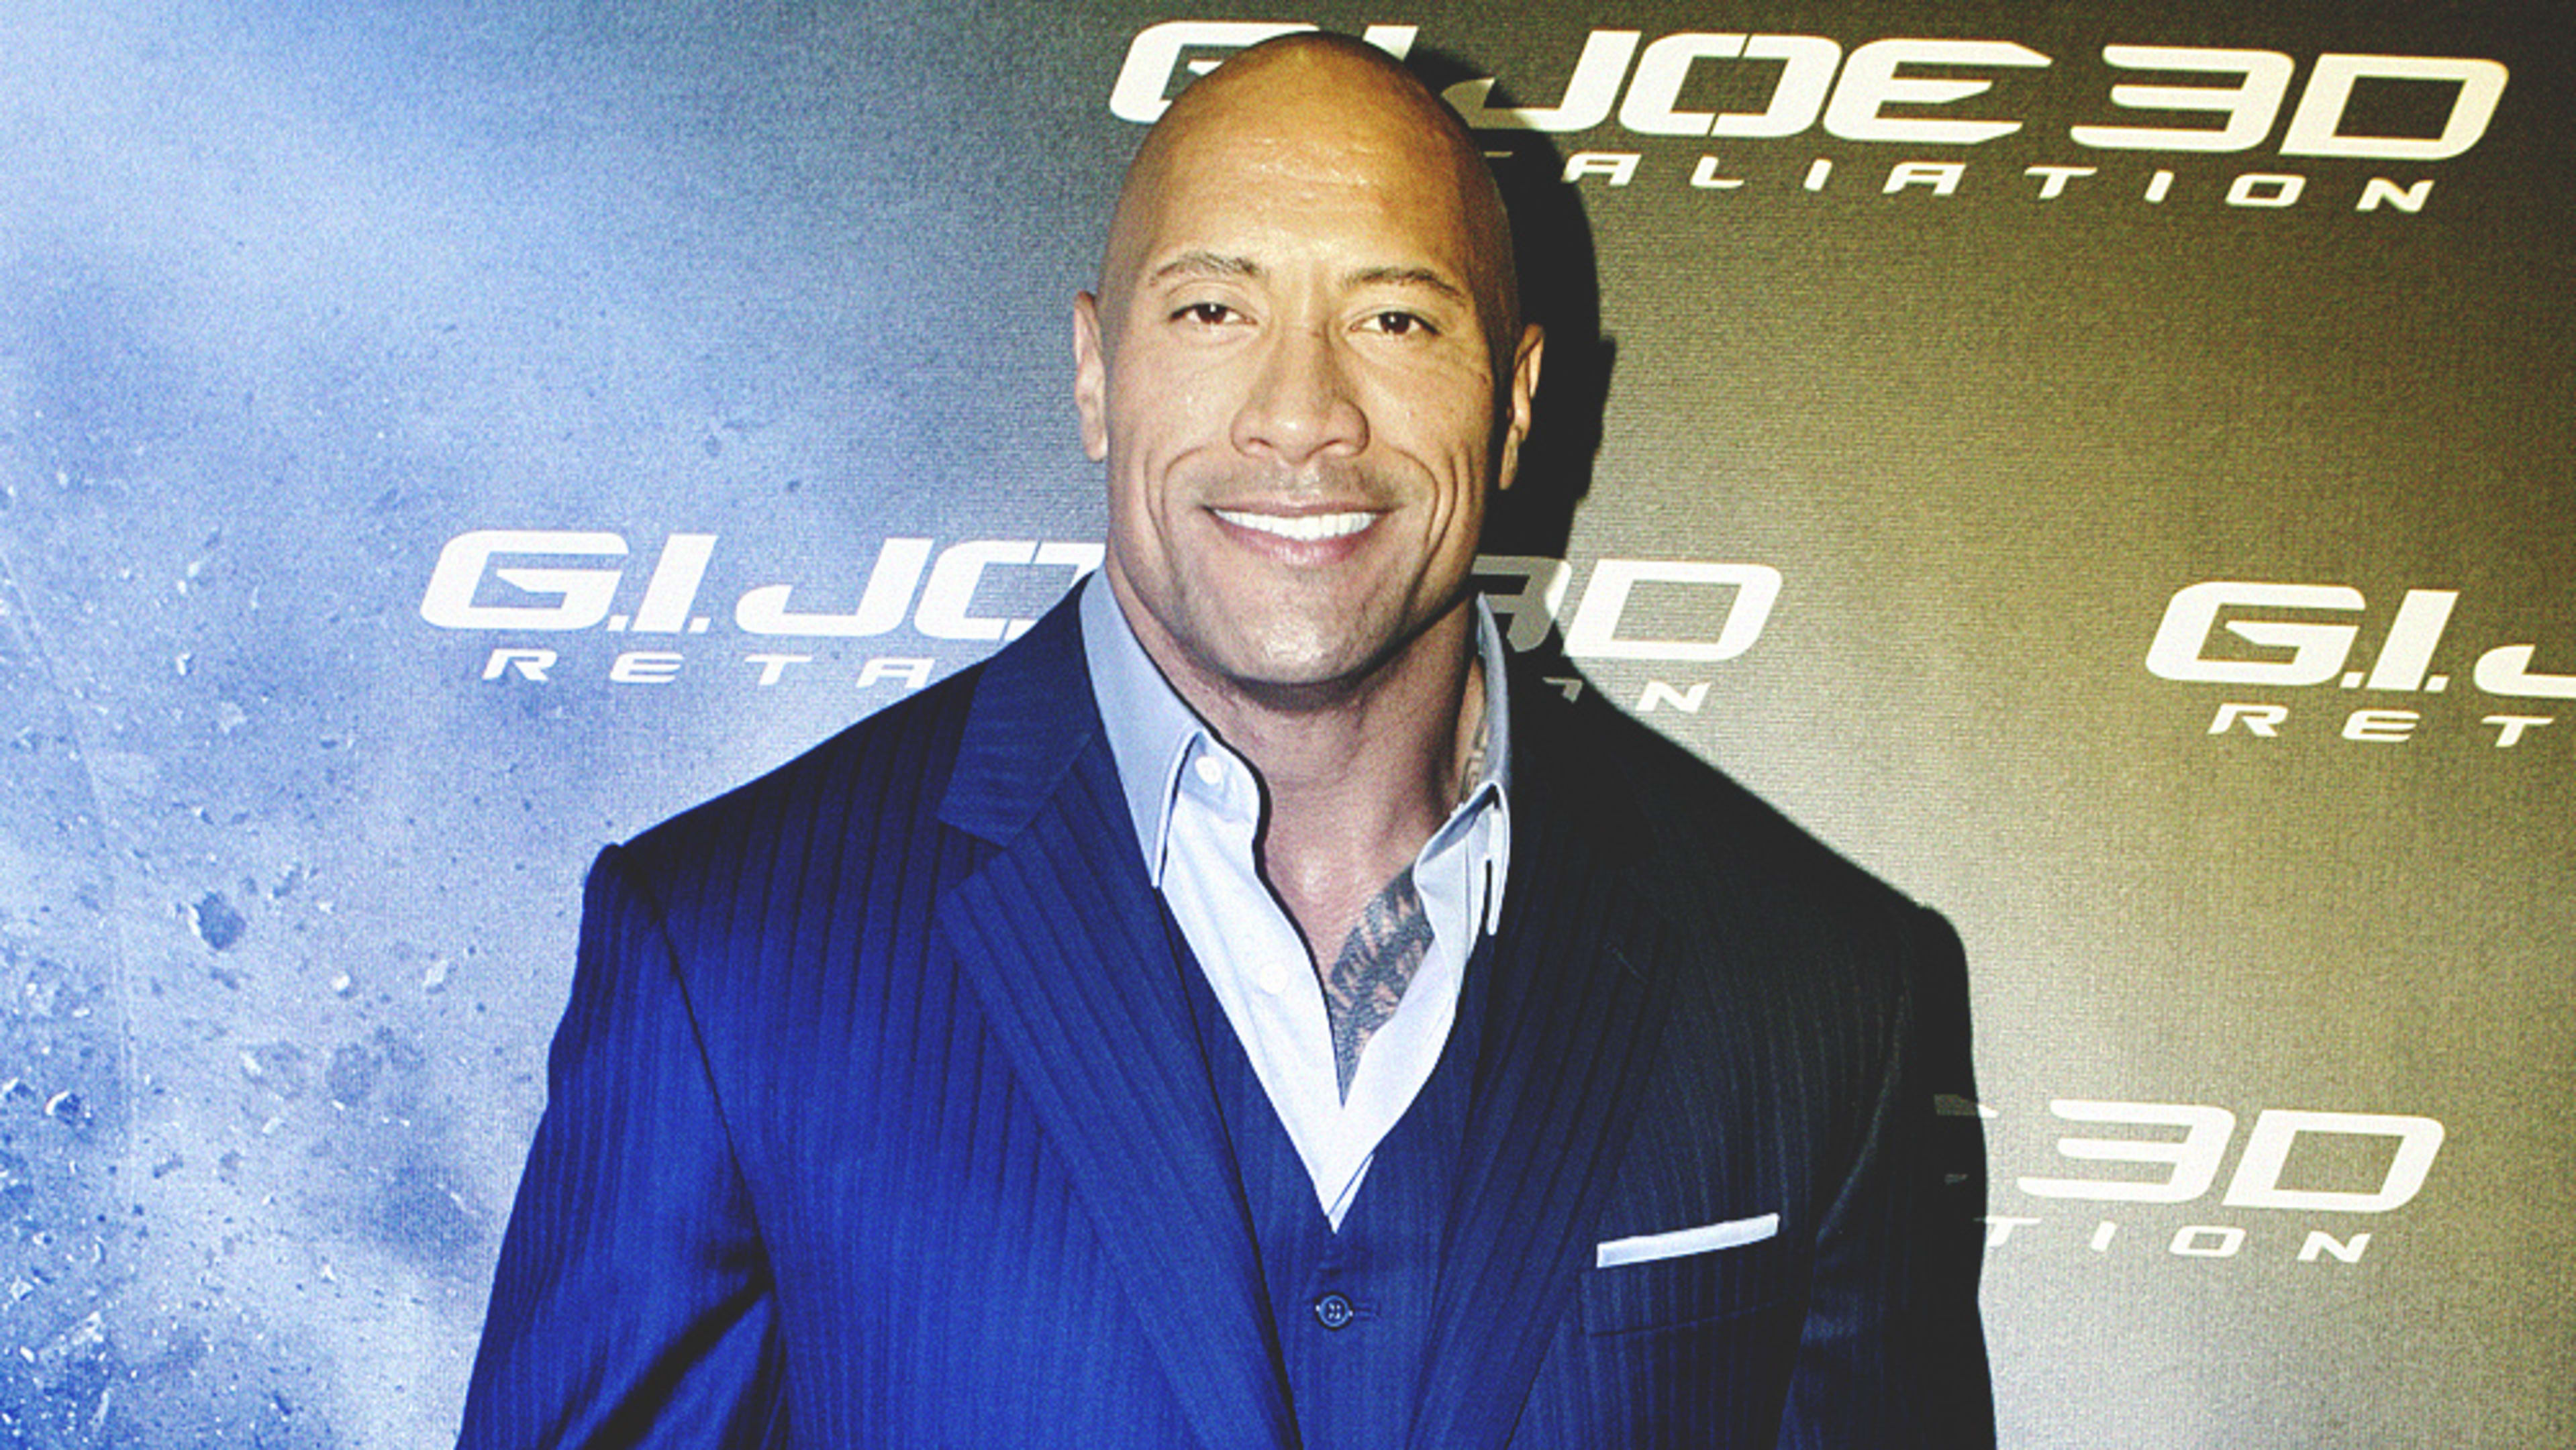 Dwayne Johnson just launched his own creative ad agency